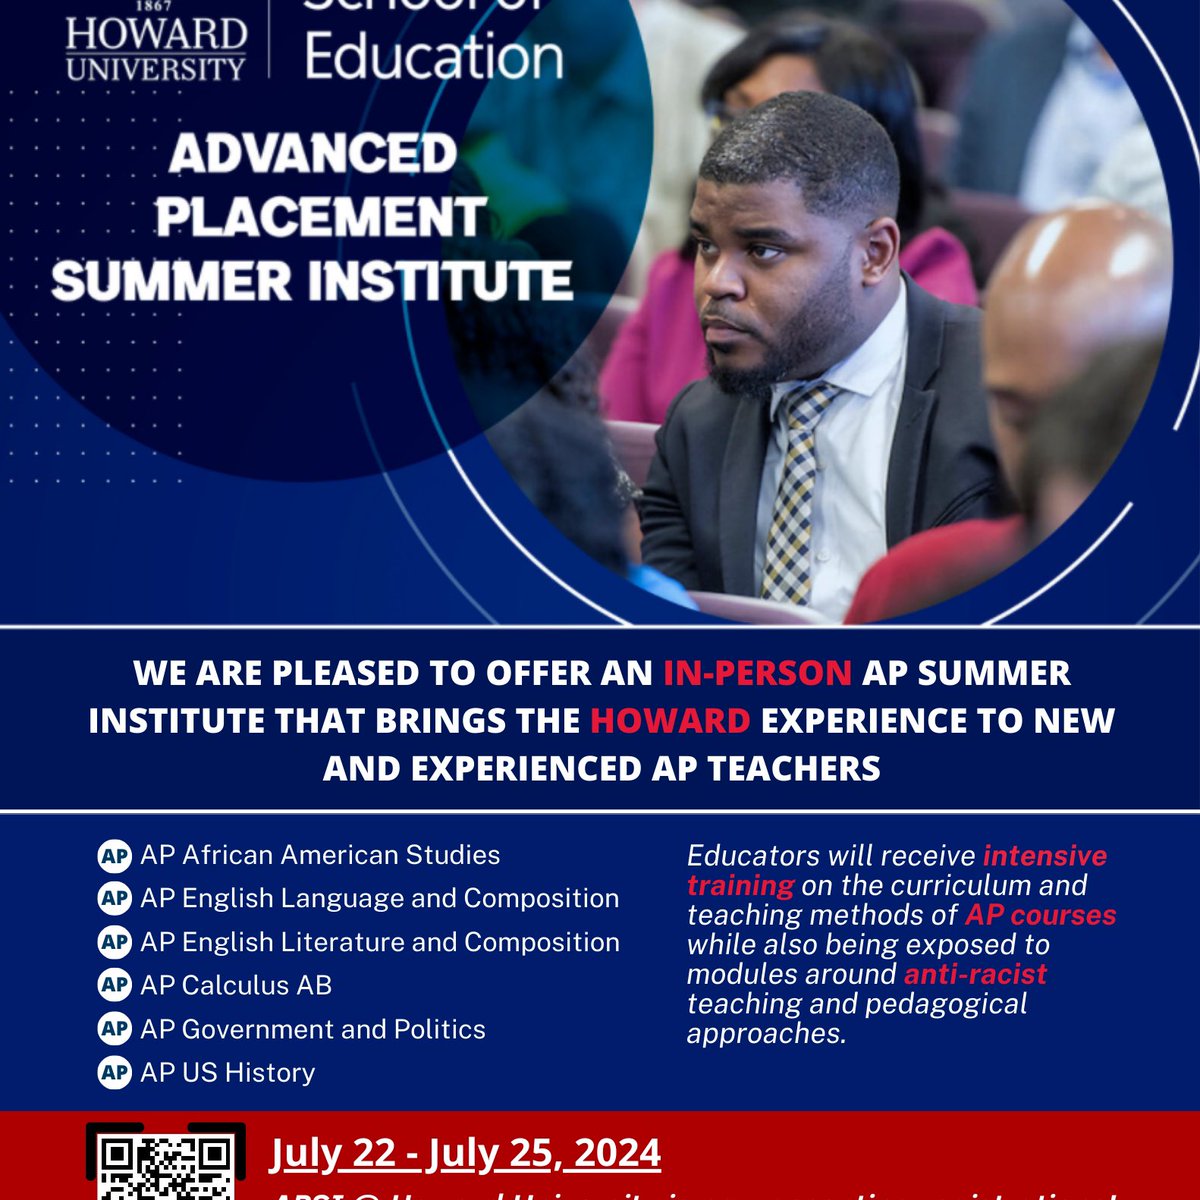 Advanced Placement Summer Institute (APSI) is happening (7/22-7/25) at Howard University! Teachers who attend the APSI will gain knowledge in culturally-affirming instruction that facilitates student success via the plenary sessions. Find out more: education.howard.edu/affiliated-pro…